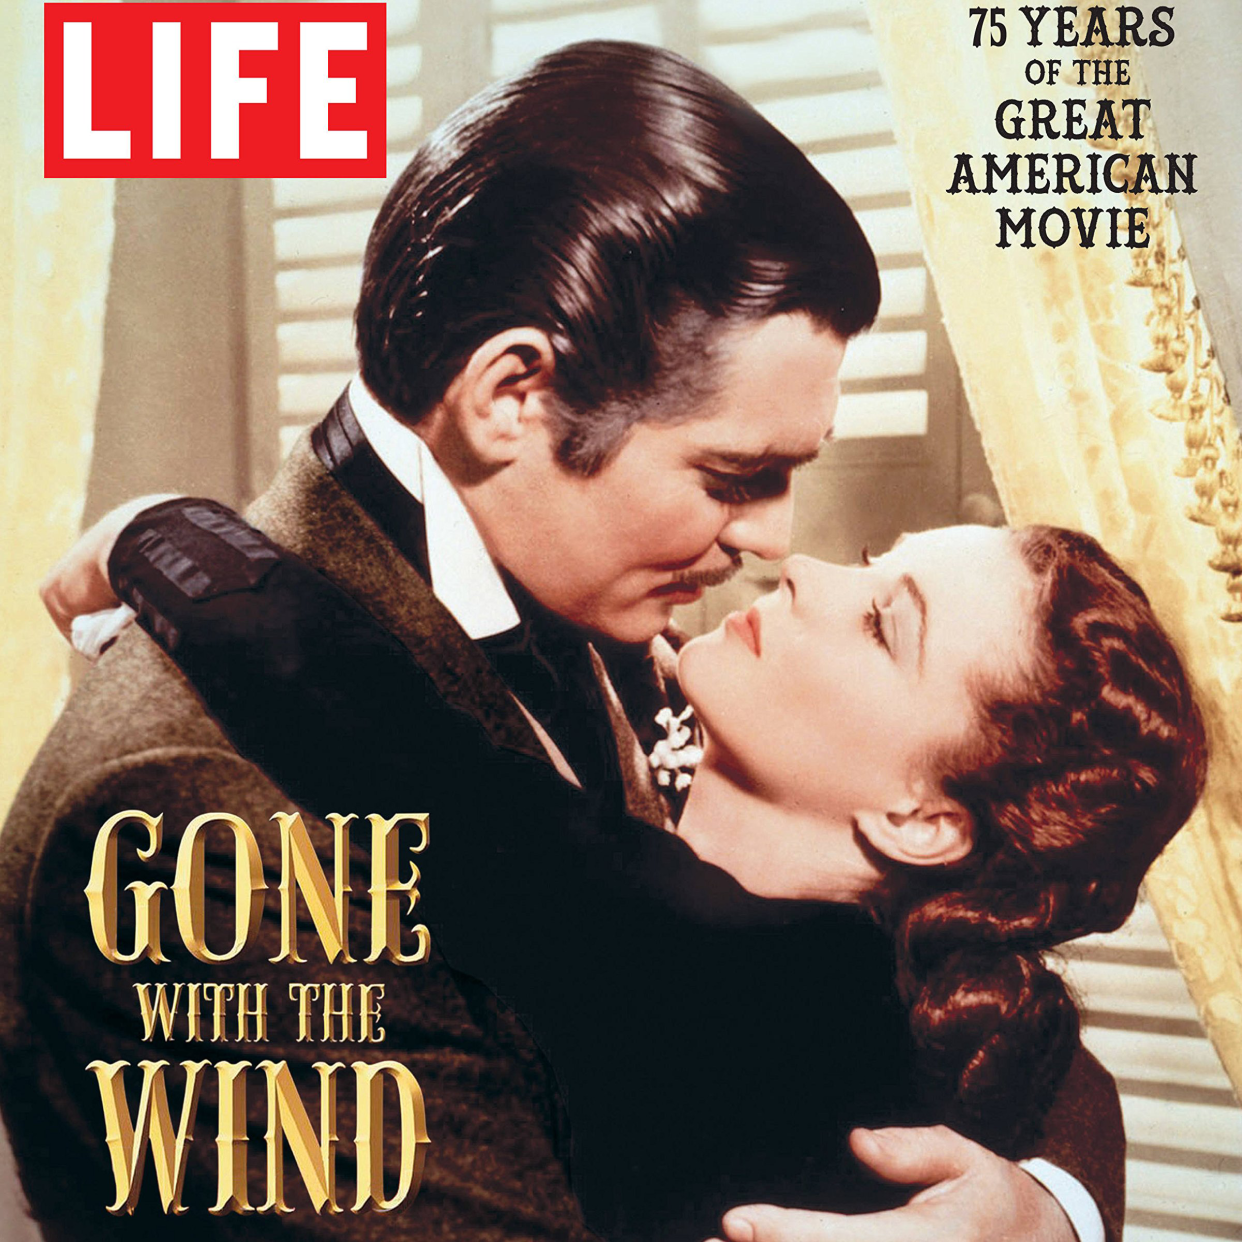 'Gone with the Wind' on LIFE magazine